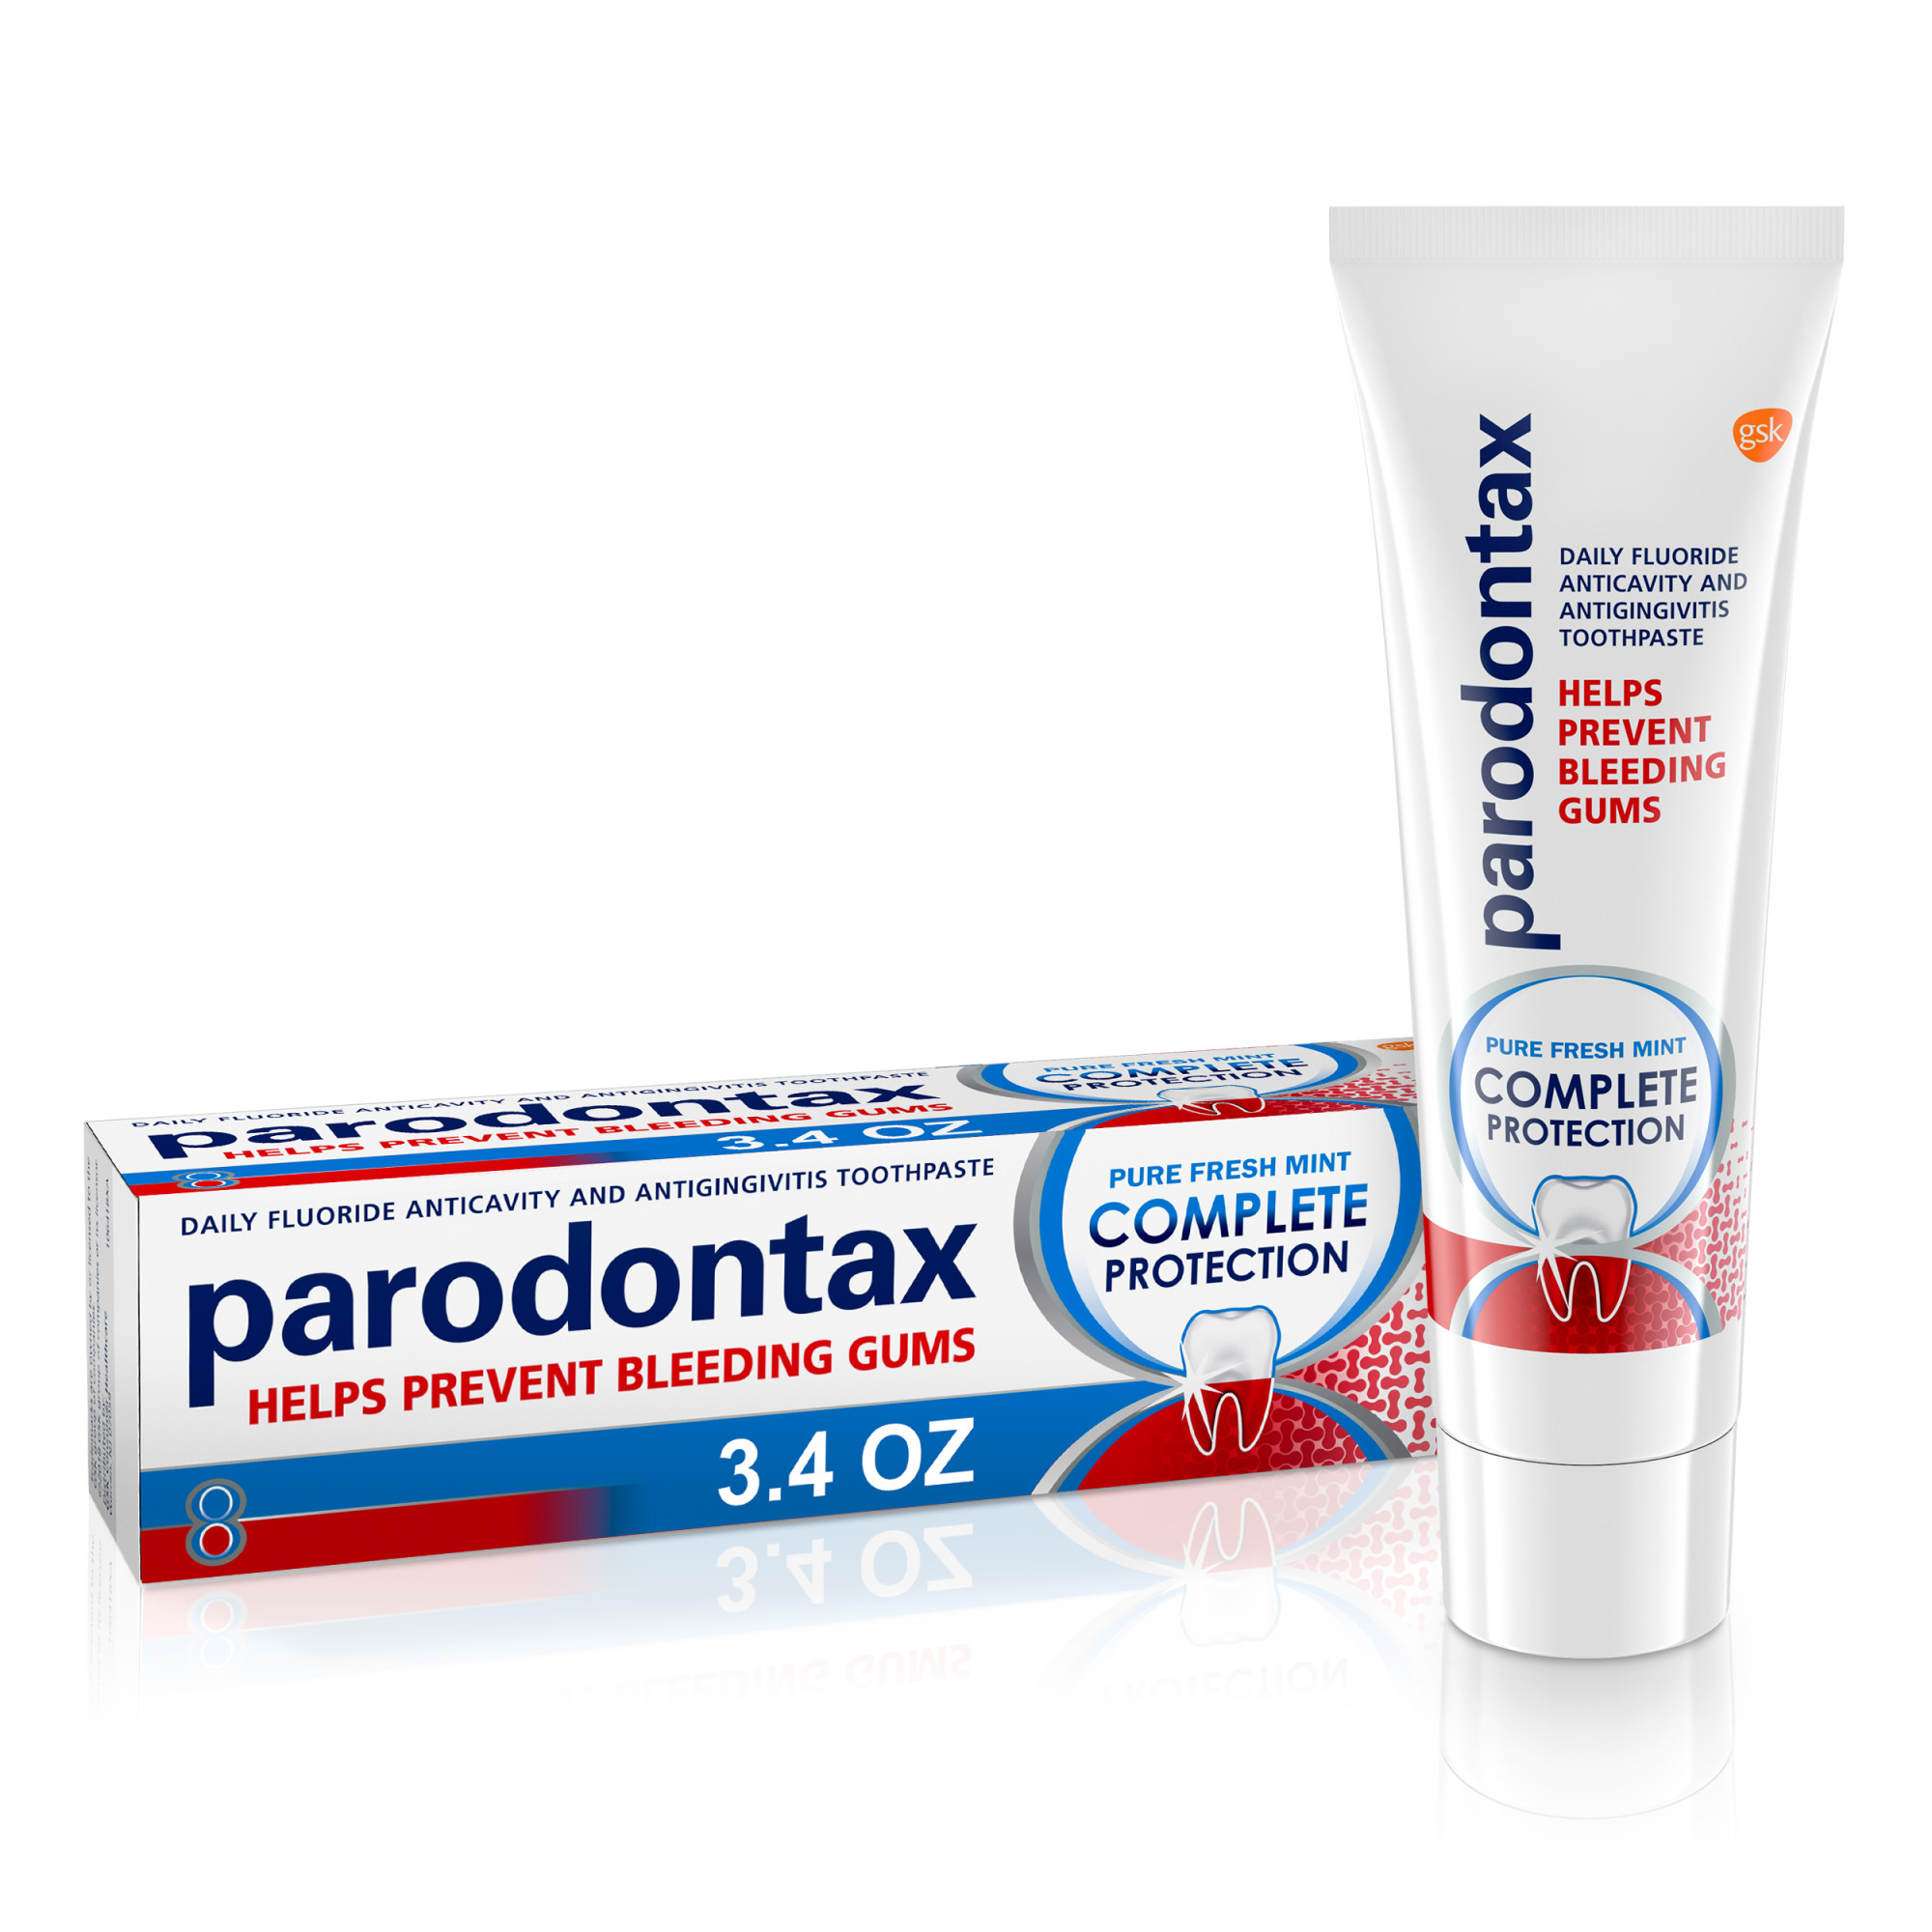 Parodontax Complete Protection Gingivitis Toothpaste, Pure Fresh Mint, 3.4 Oz - image 1 of 12